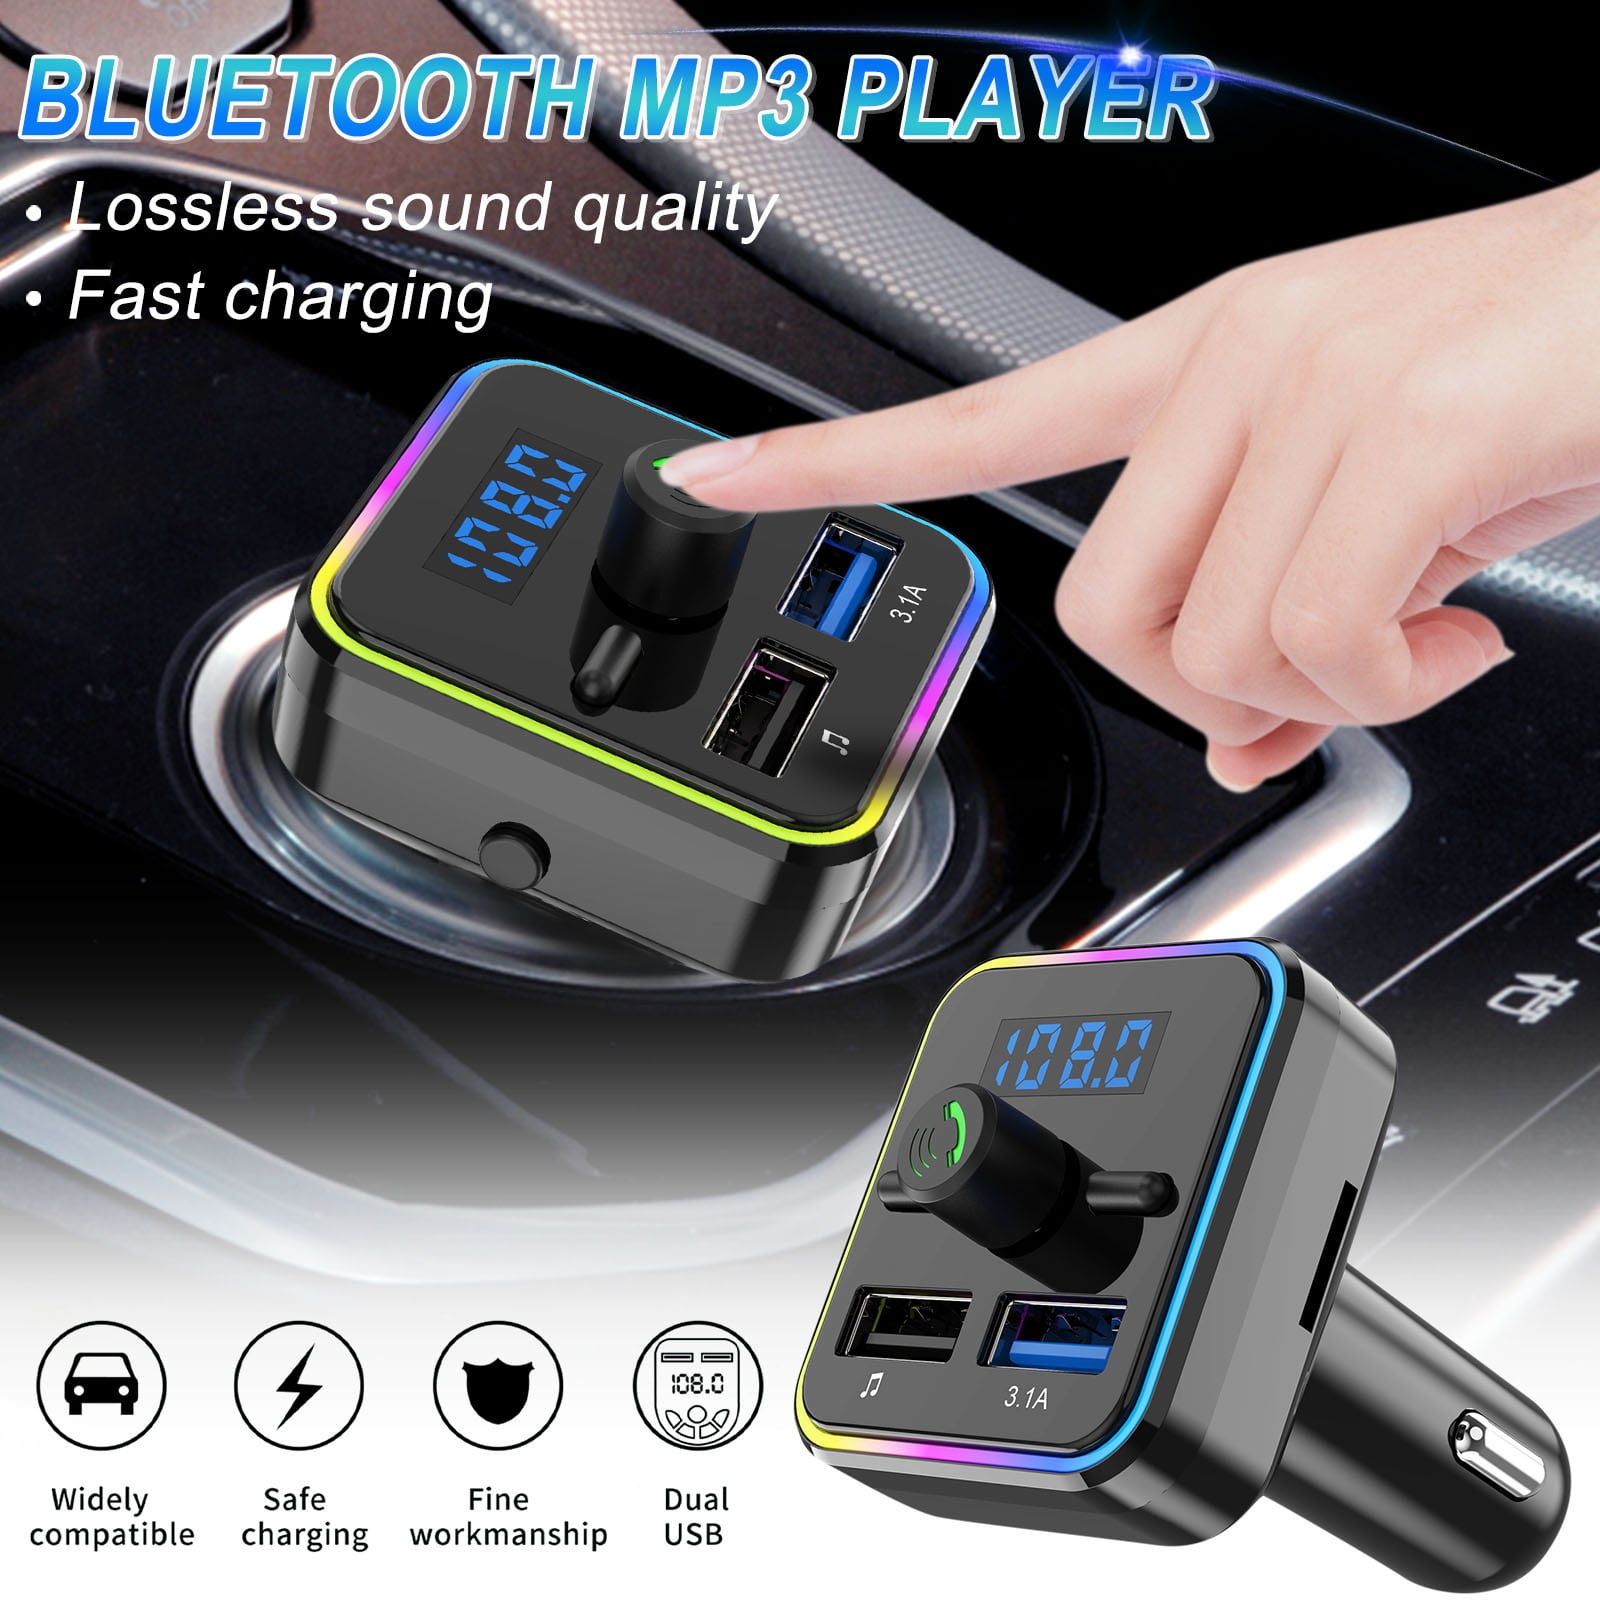 Hatatit Bluetooth FM transmitter car wireless radio adapter kit W 1.8-inch  color display S Hands-free call AUX input/output SD/TF card USB charger  QC3.0 suitable for all smartphone audio players 